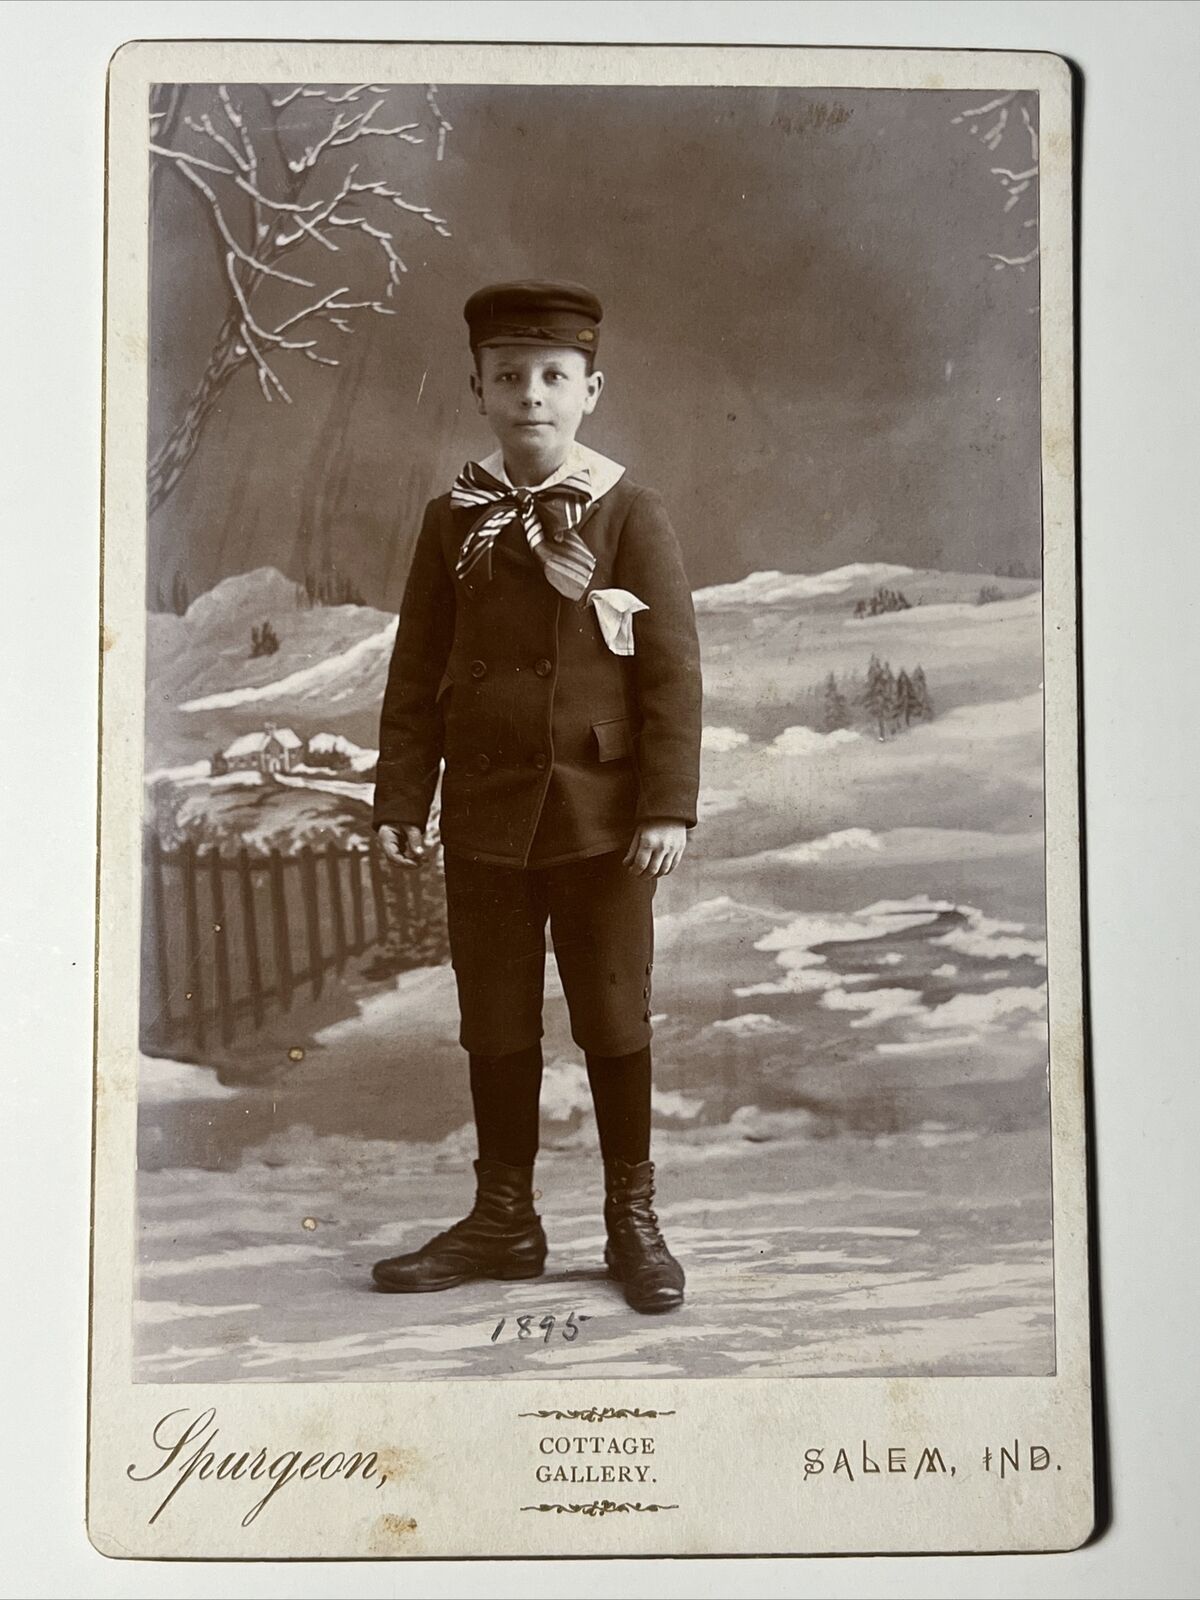 1895 SALEM INDIANA Very Clear BOY in The SNOW 1880s Cabinet Card Photo SPURGEON